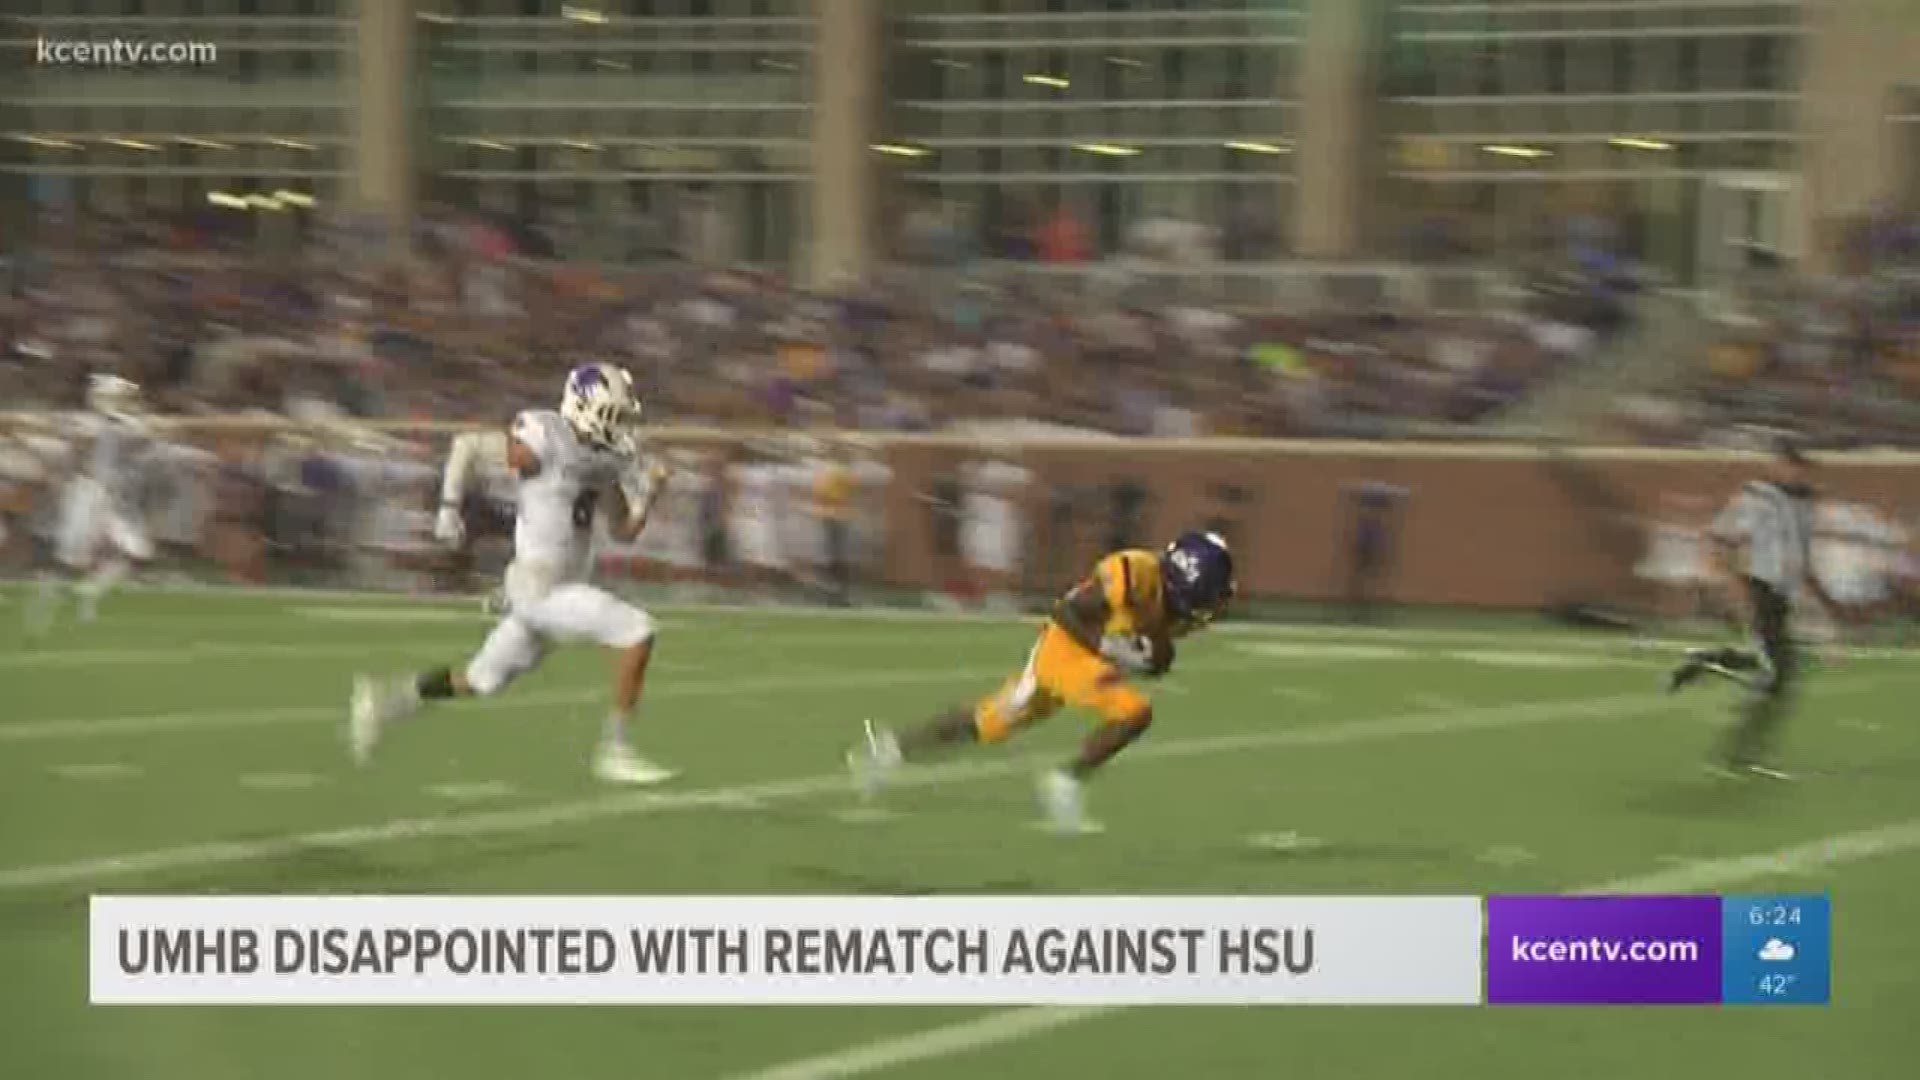 UMHB disappointed with rematch against HSU